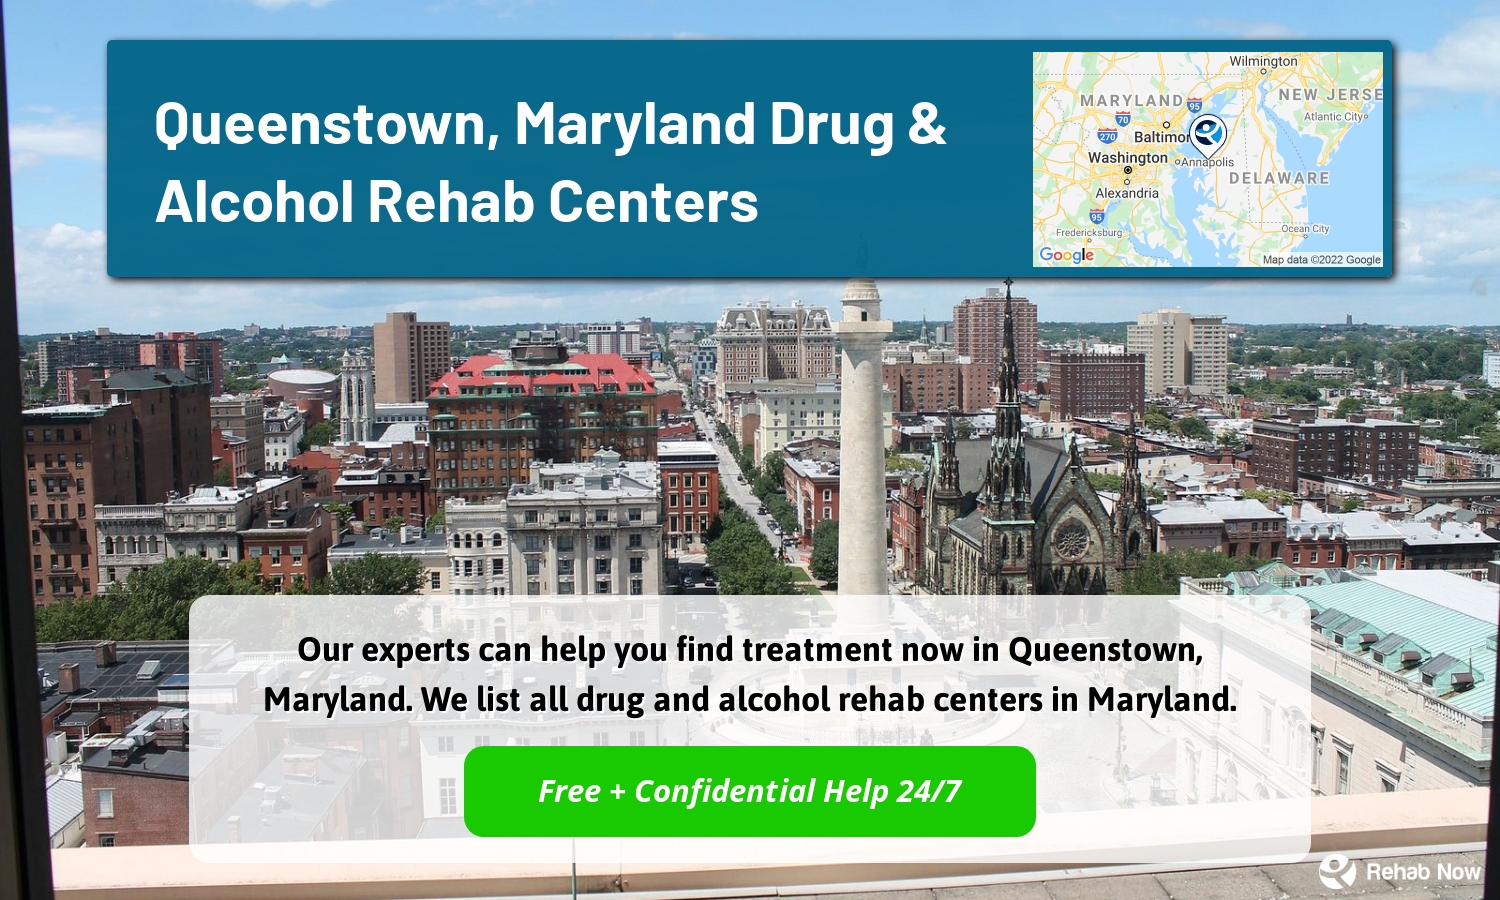 Our experts can help you find treatment now in Queenstown, Maryland. We list all drug and alcohol rehab centers in Maryland.